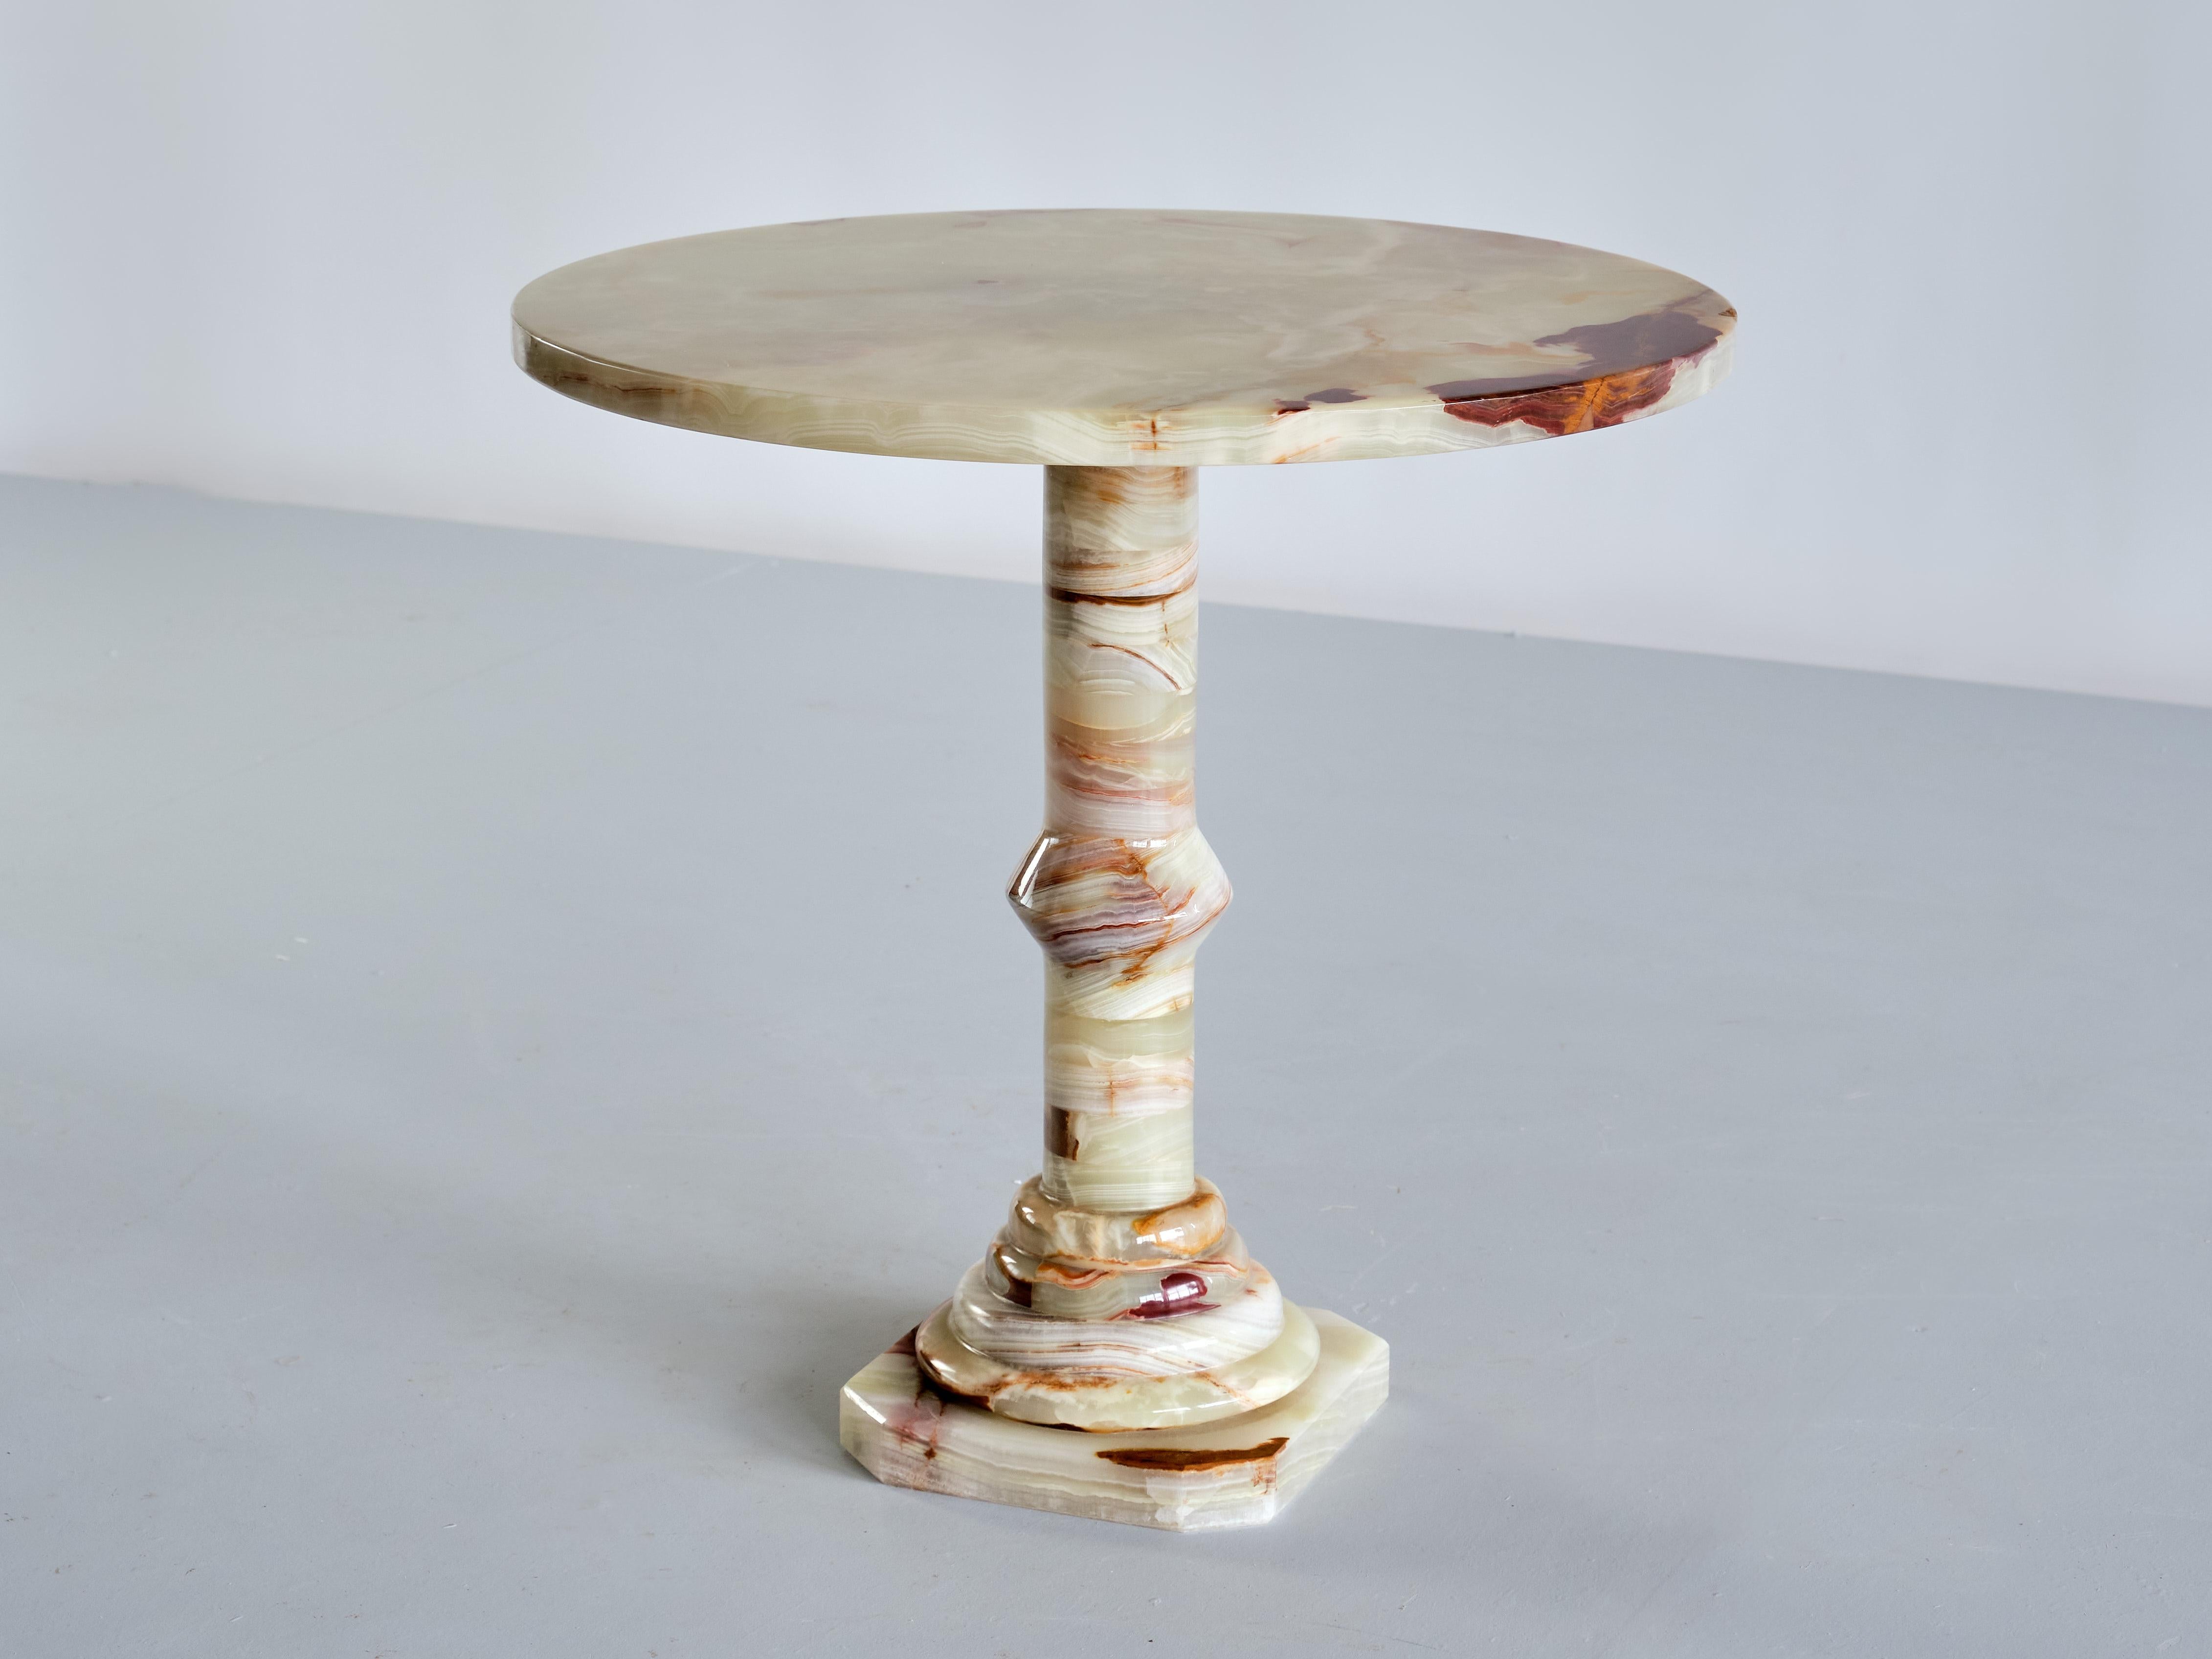 This elegant side table was produced in Italy in the 1960s. The pedestal base made of circular stacked discs and the round top are all made of solid multicolored onyx. The different hues and intensities of red, white and green give the table a